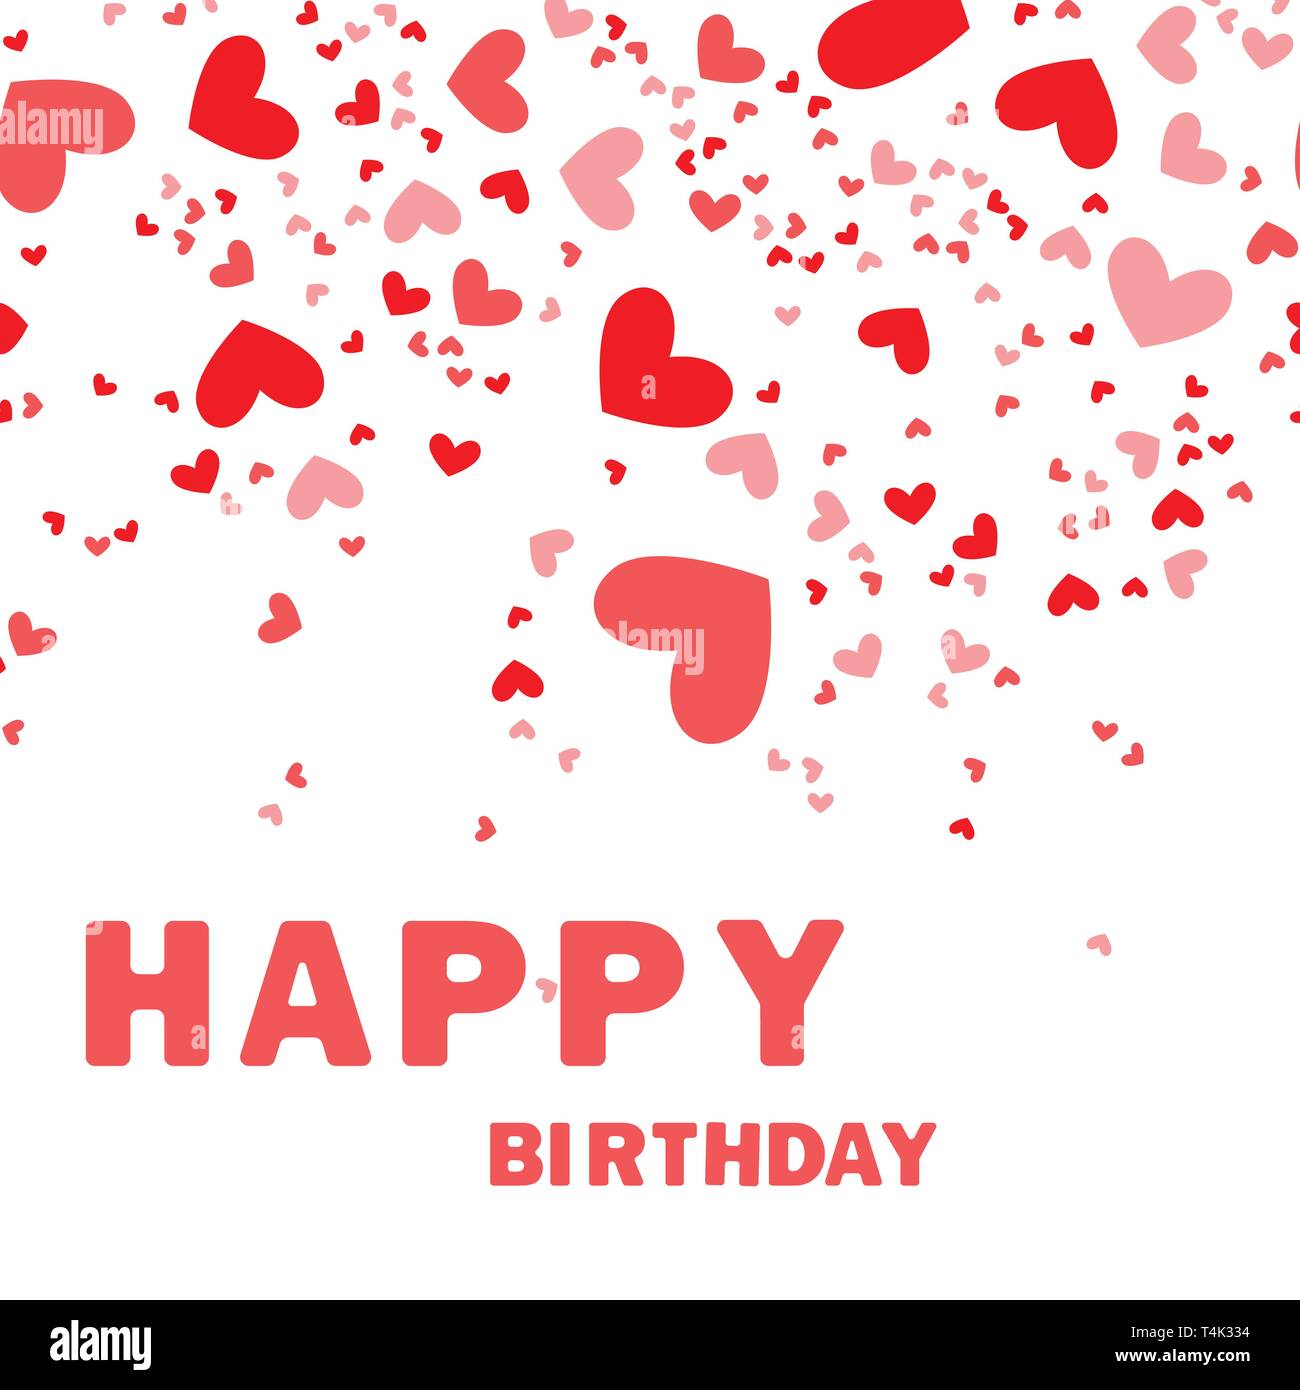 Happy birthday greeting card, banner design with confetti hearts Stock ...